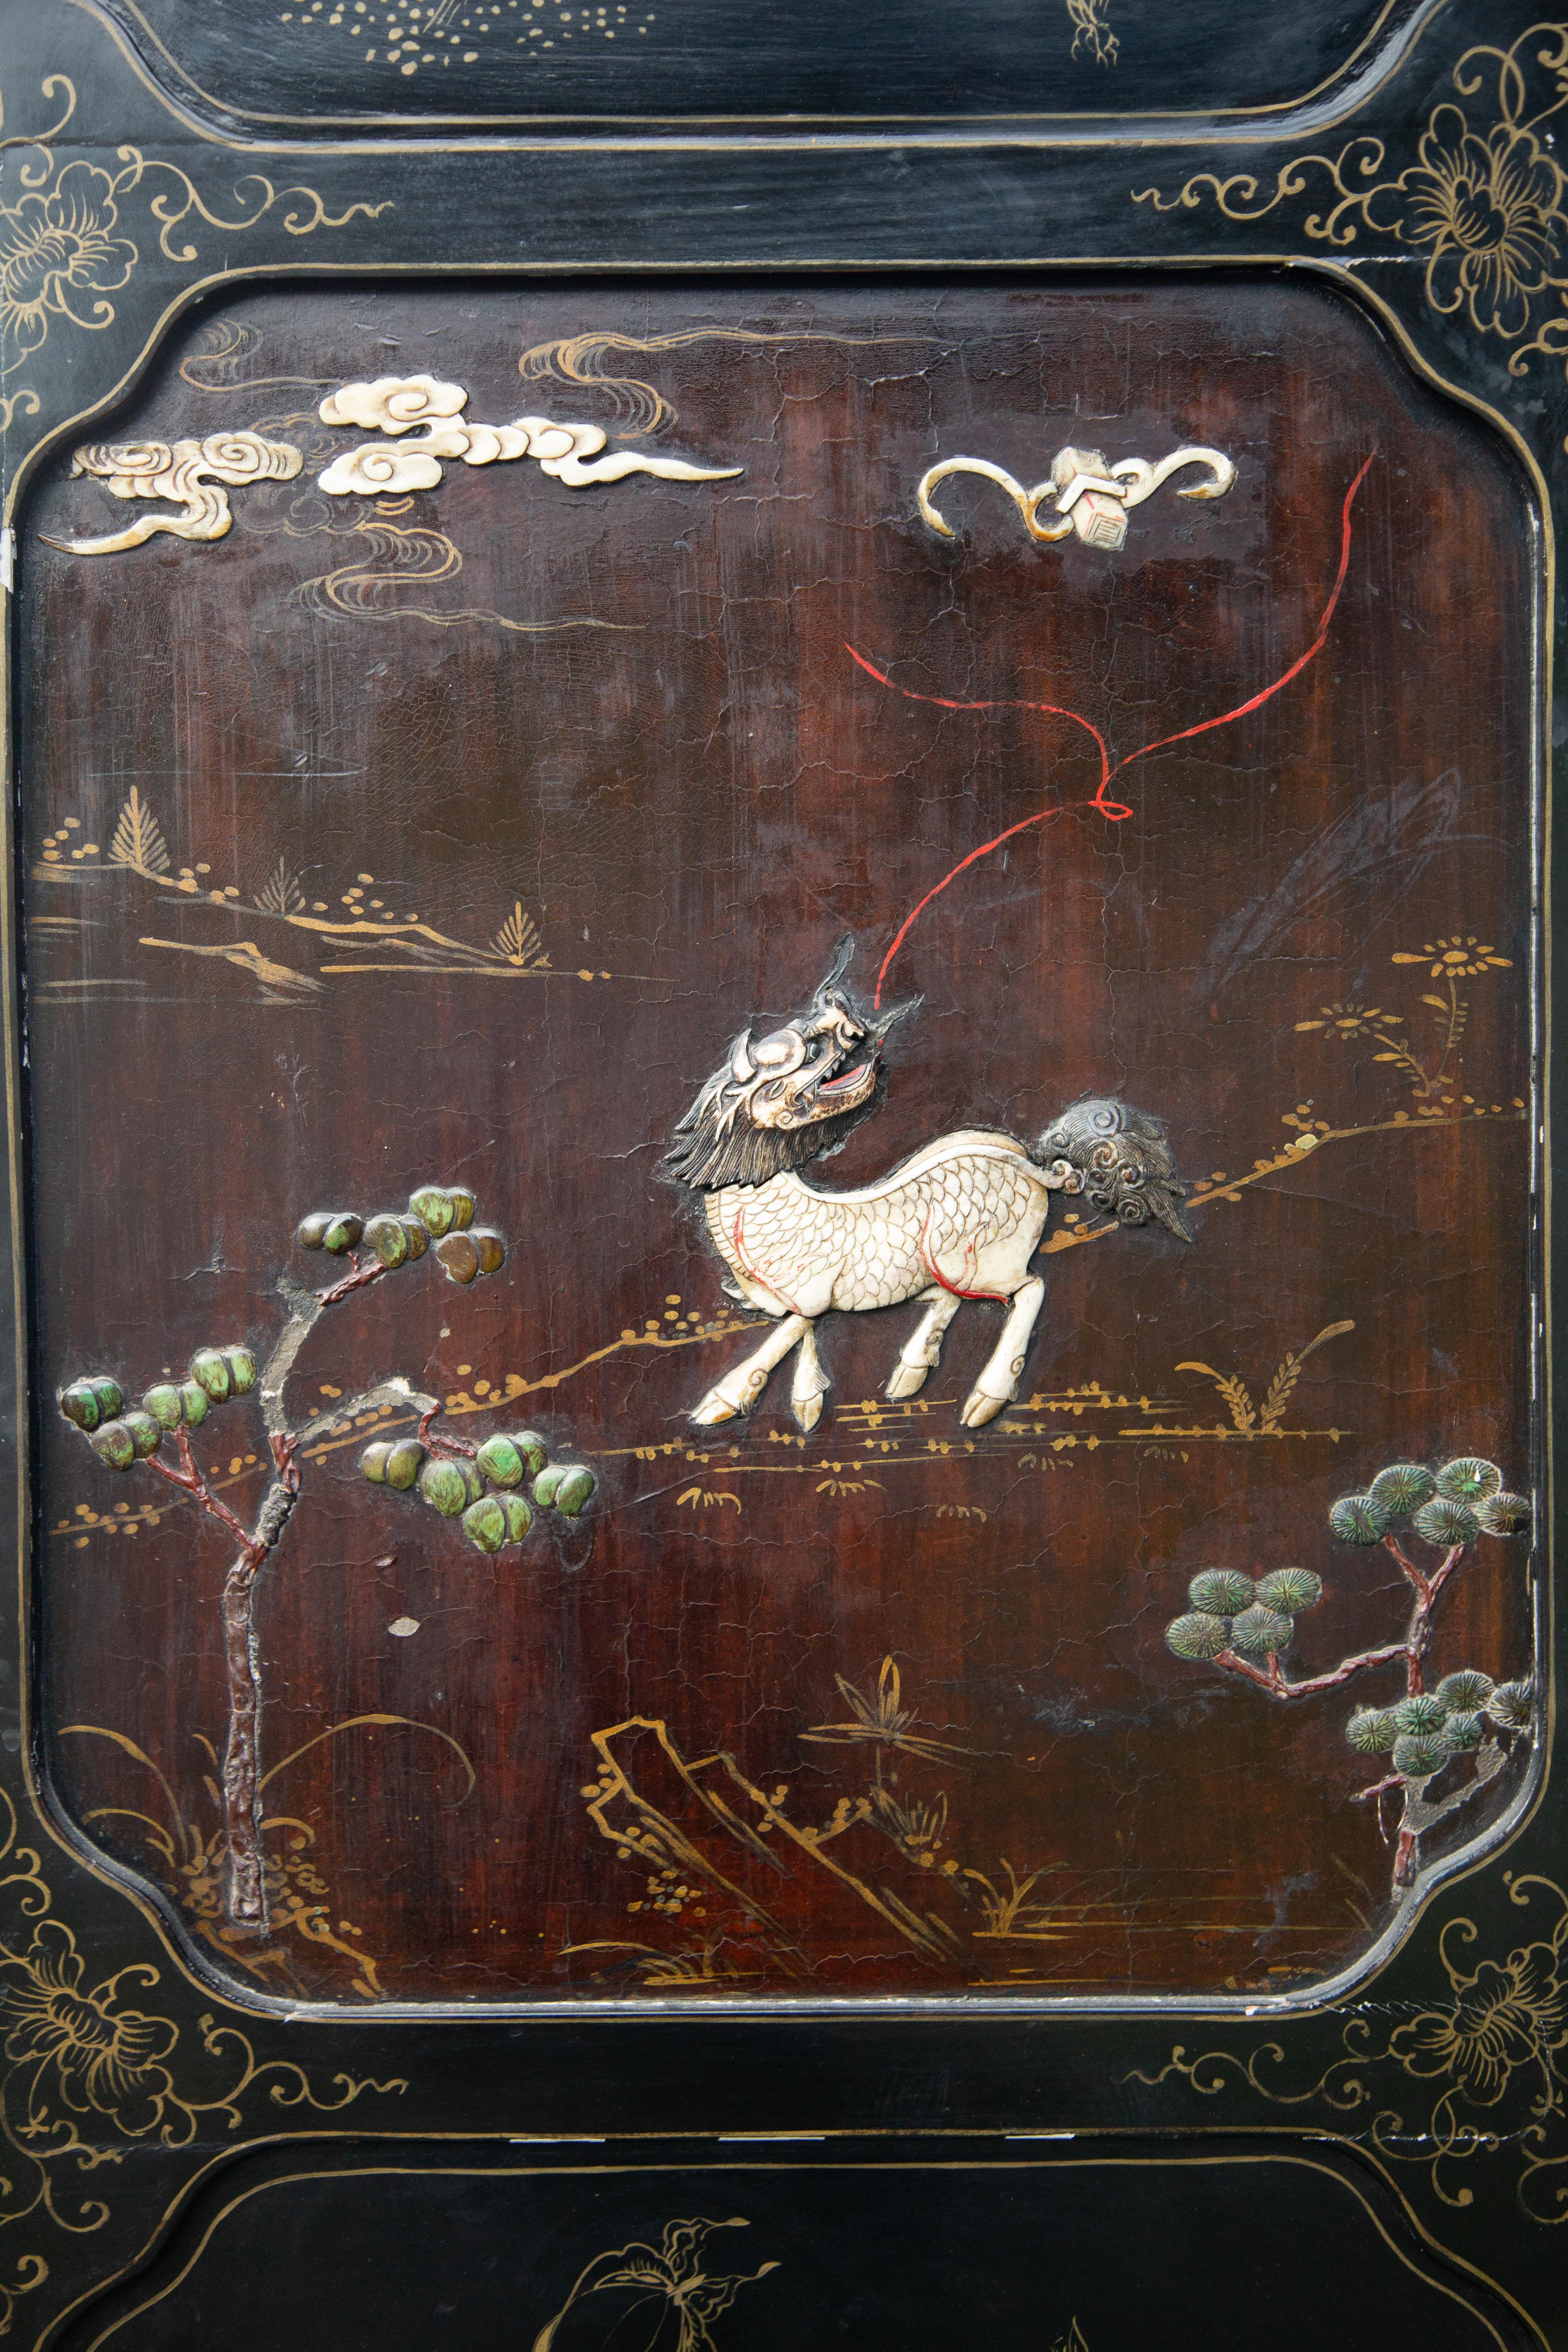 19th Century Chinese Armoire Decorated with High Relief Flora and Fauna 57.75